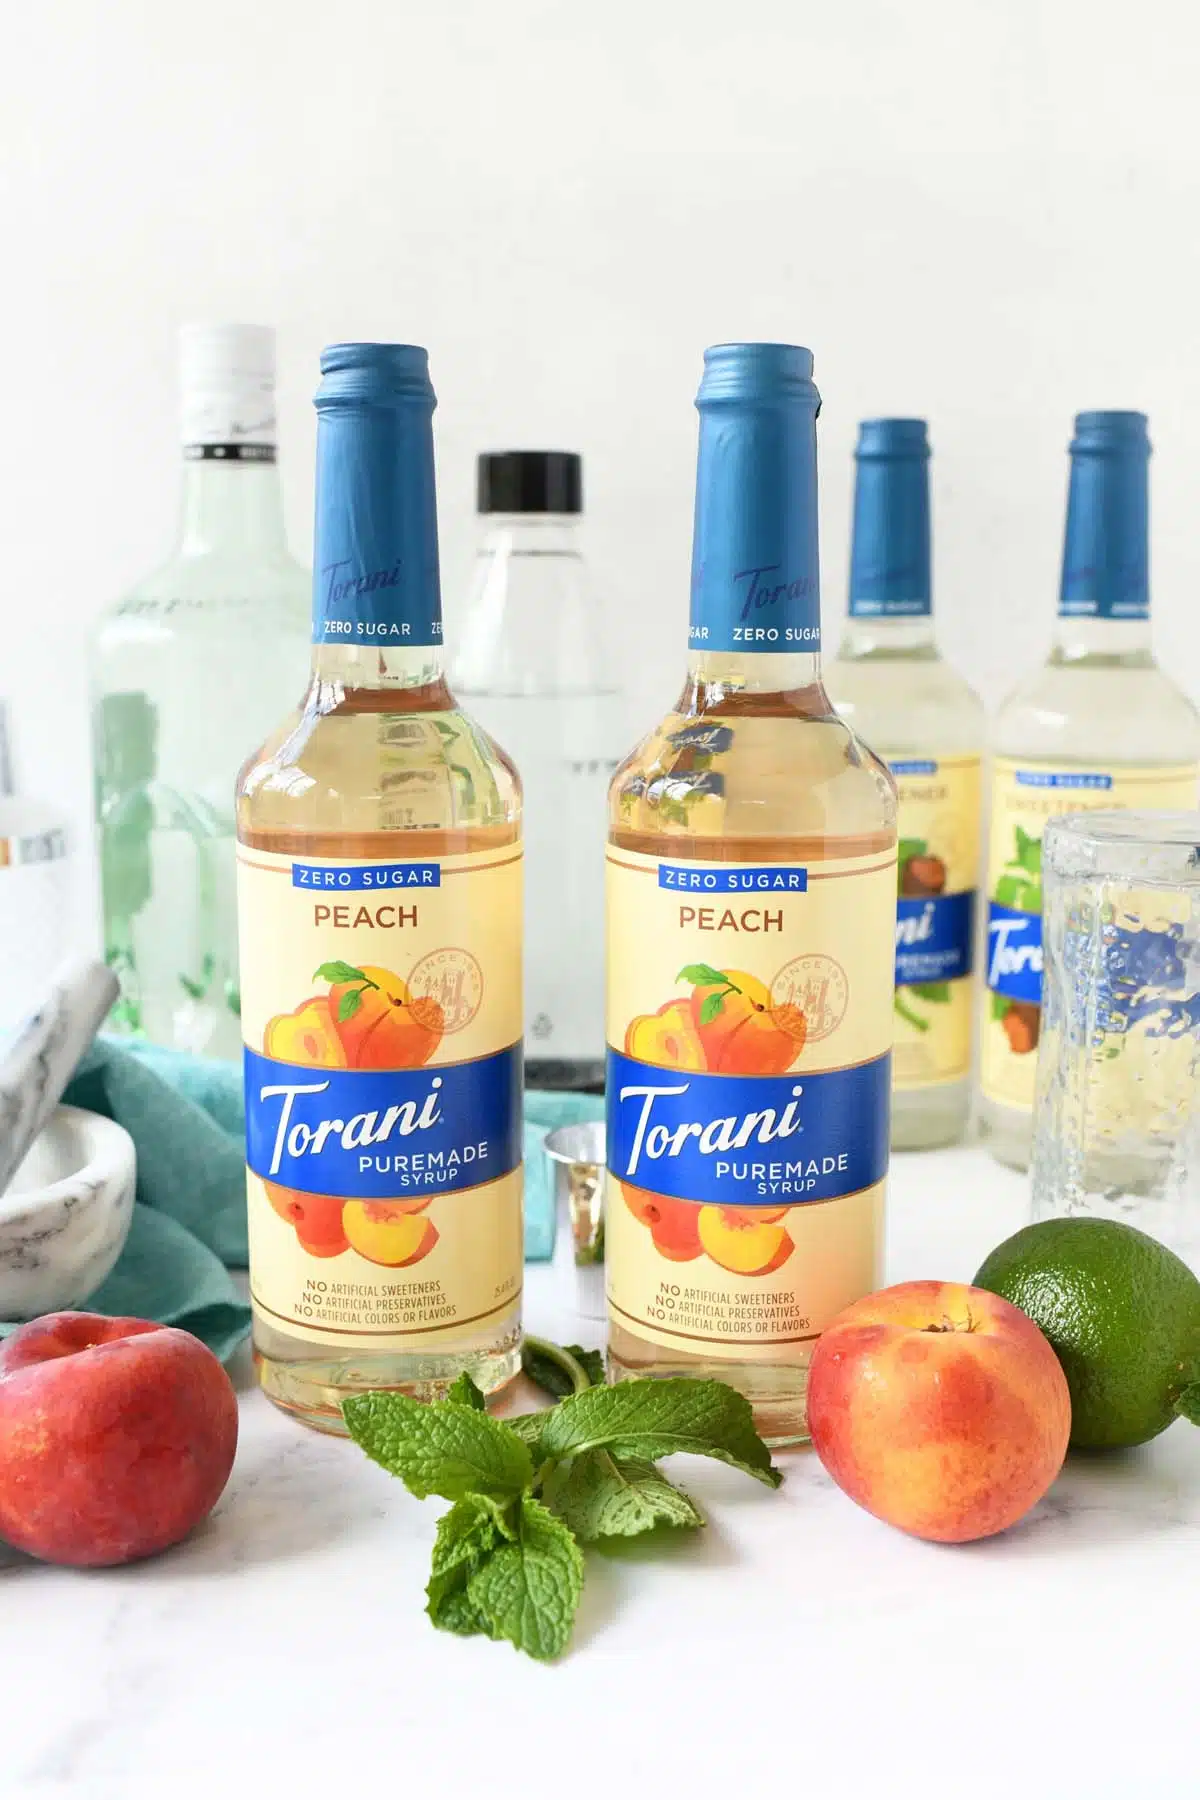 Two bottles of Torani Puremade near fresh peaches and lime.